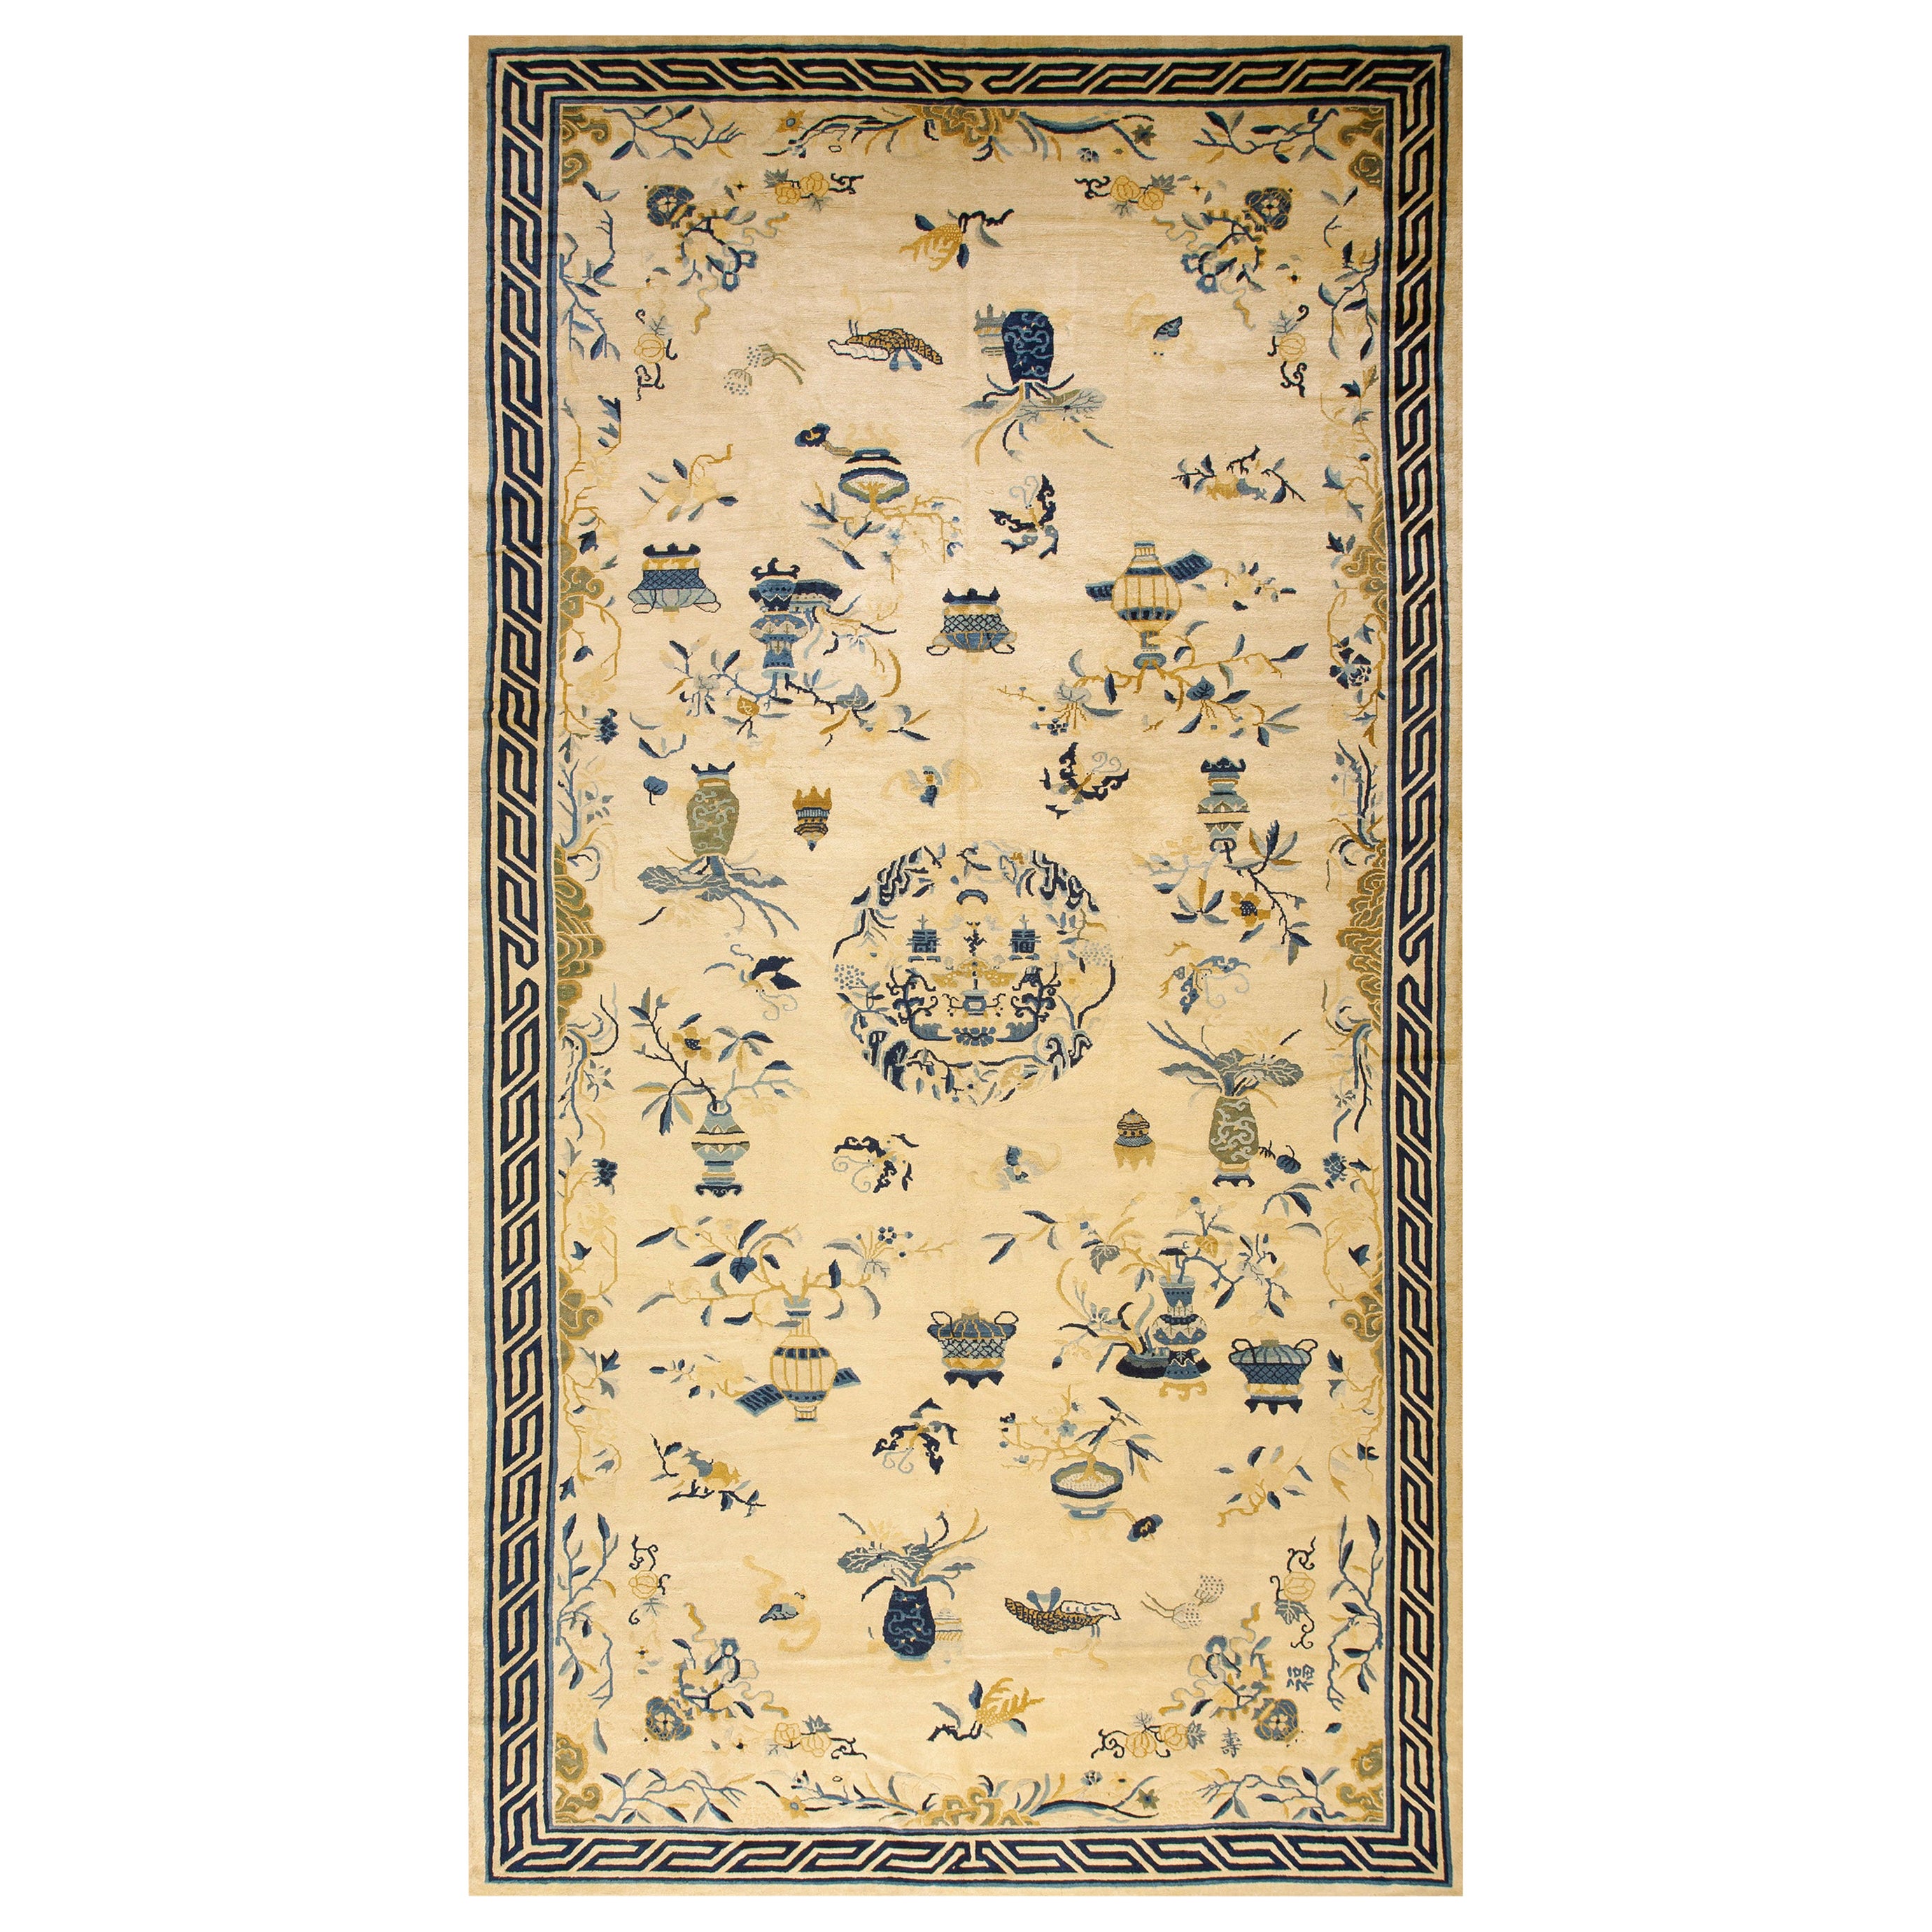 Antique Chinese Peking Rug 8'1" x 15'6" For Sale